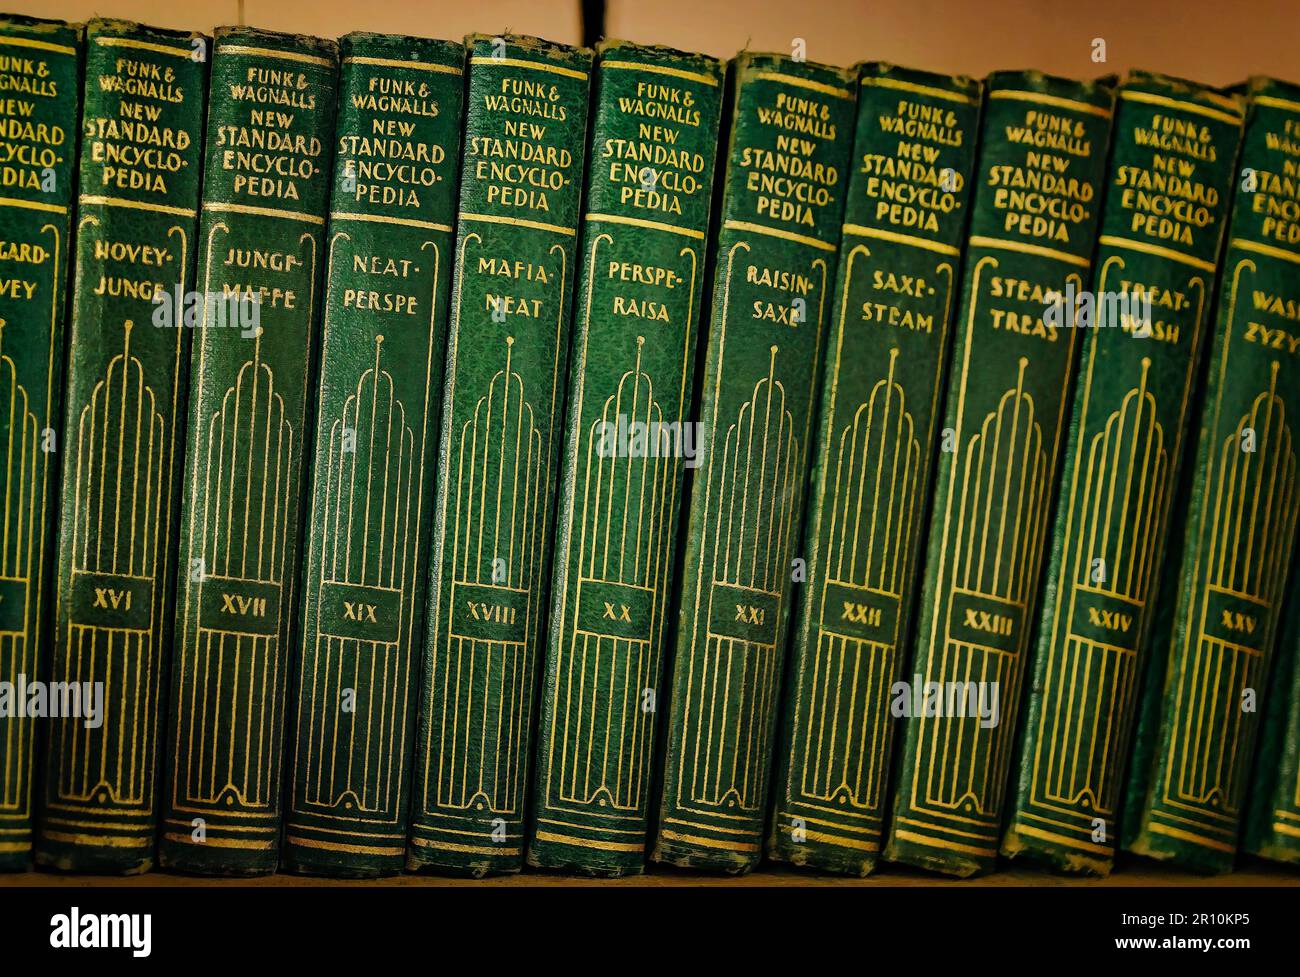 Funk & Wagnalls New Standard Encyclopedias from 1931 are displayed inside an old-fashioned general store in Stockton, Alabama. Stock Photo